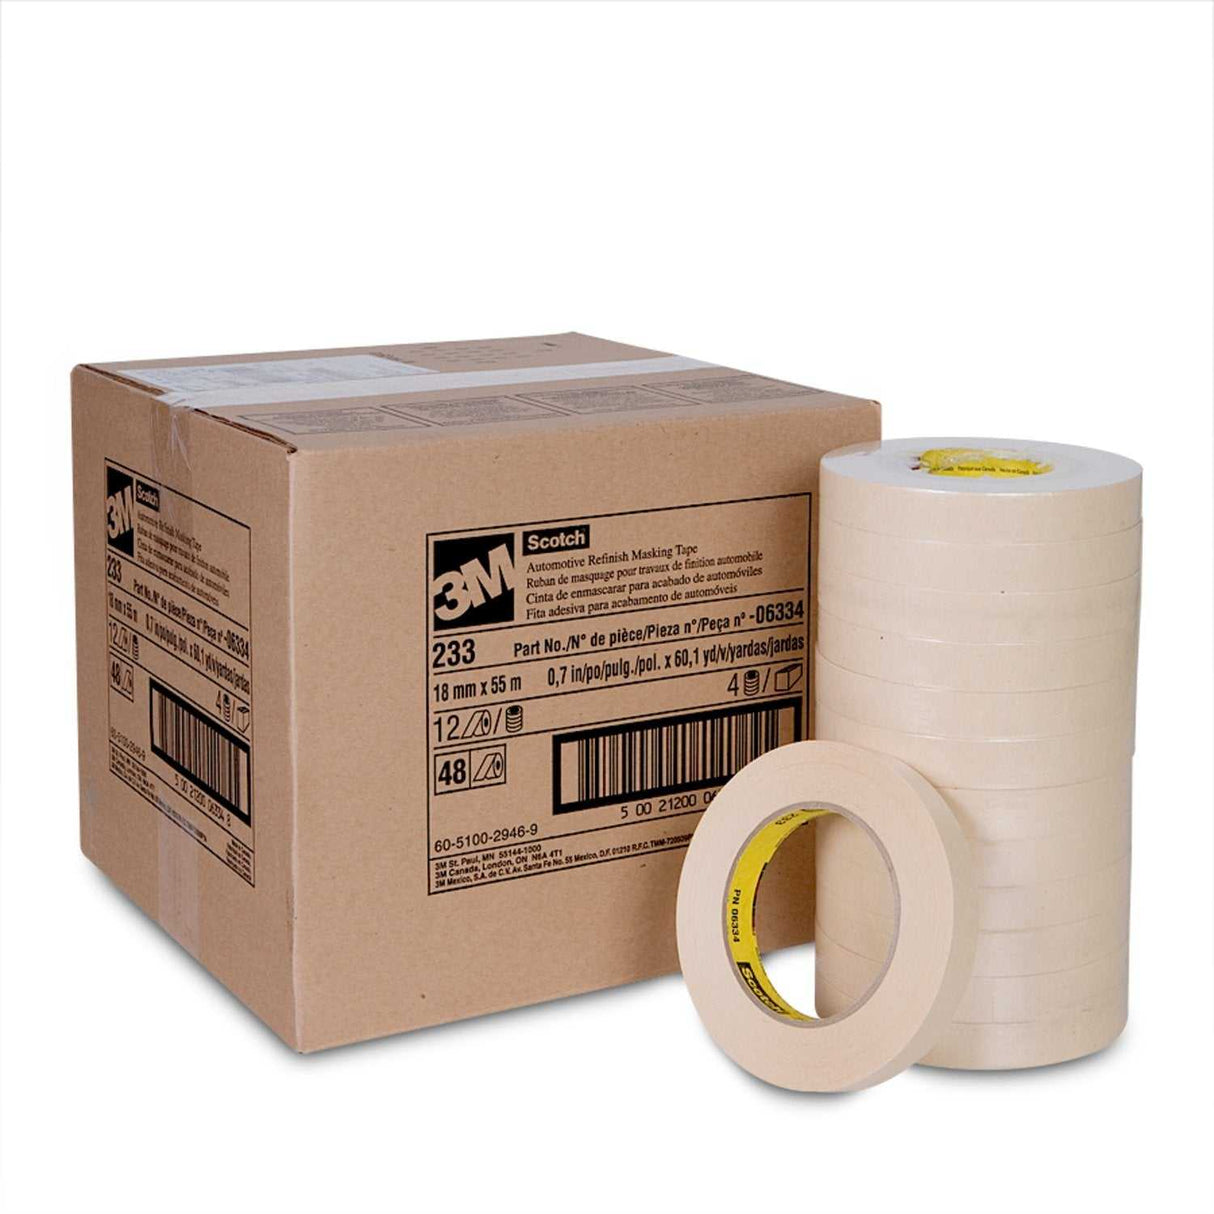 06334 3M Masking Tape Used For Automotive Paint Refinish Applications